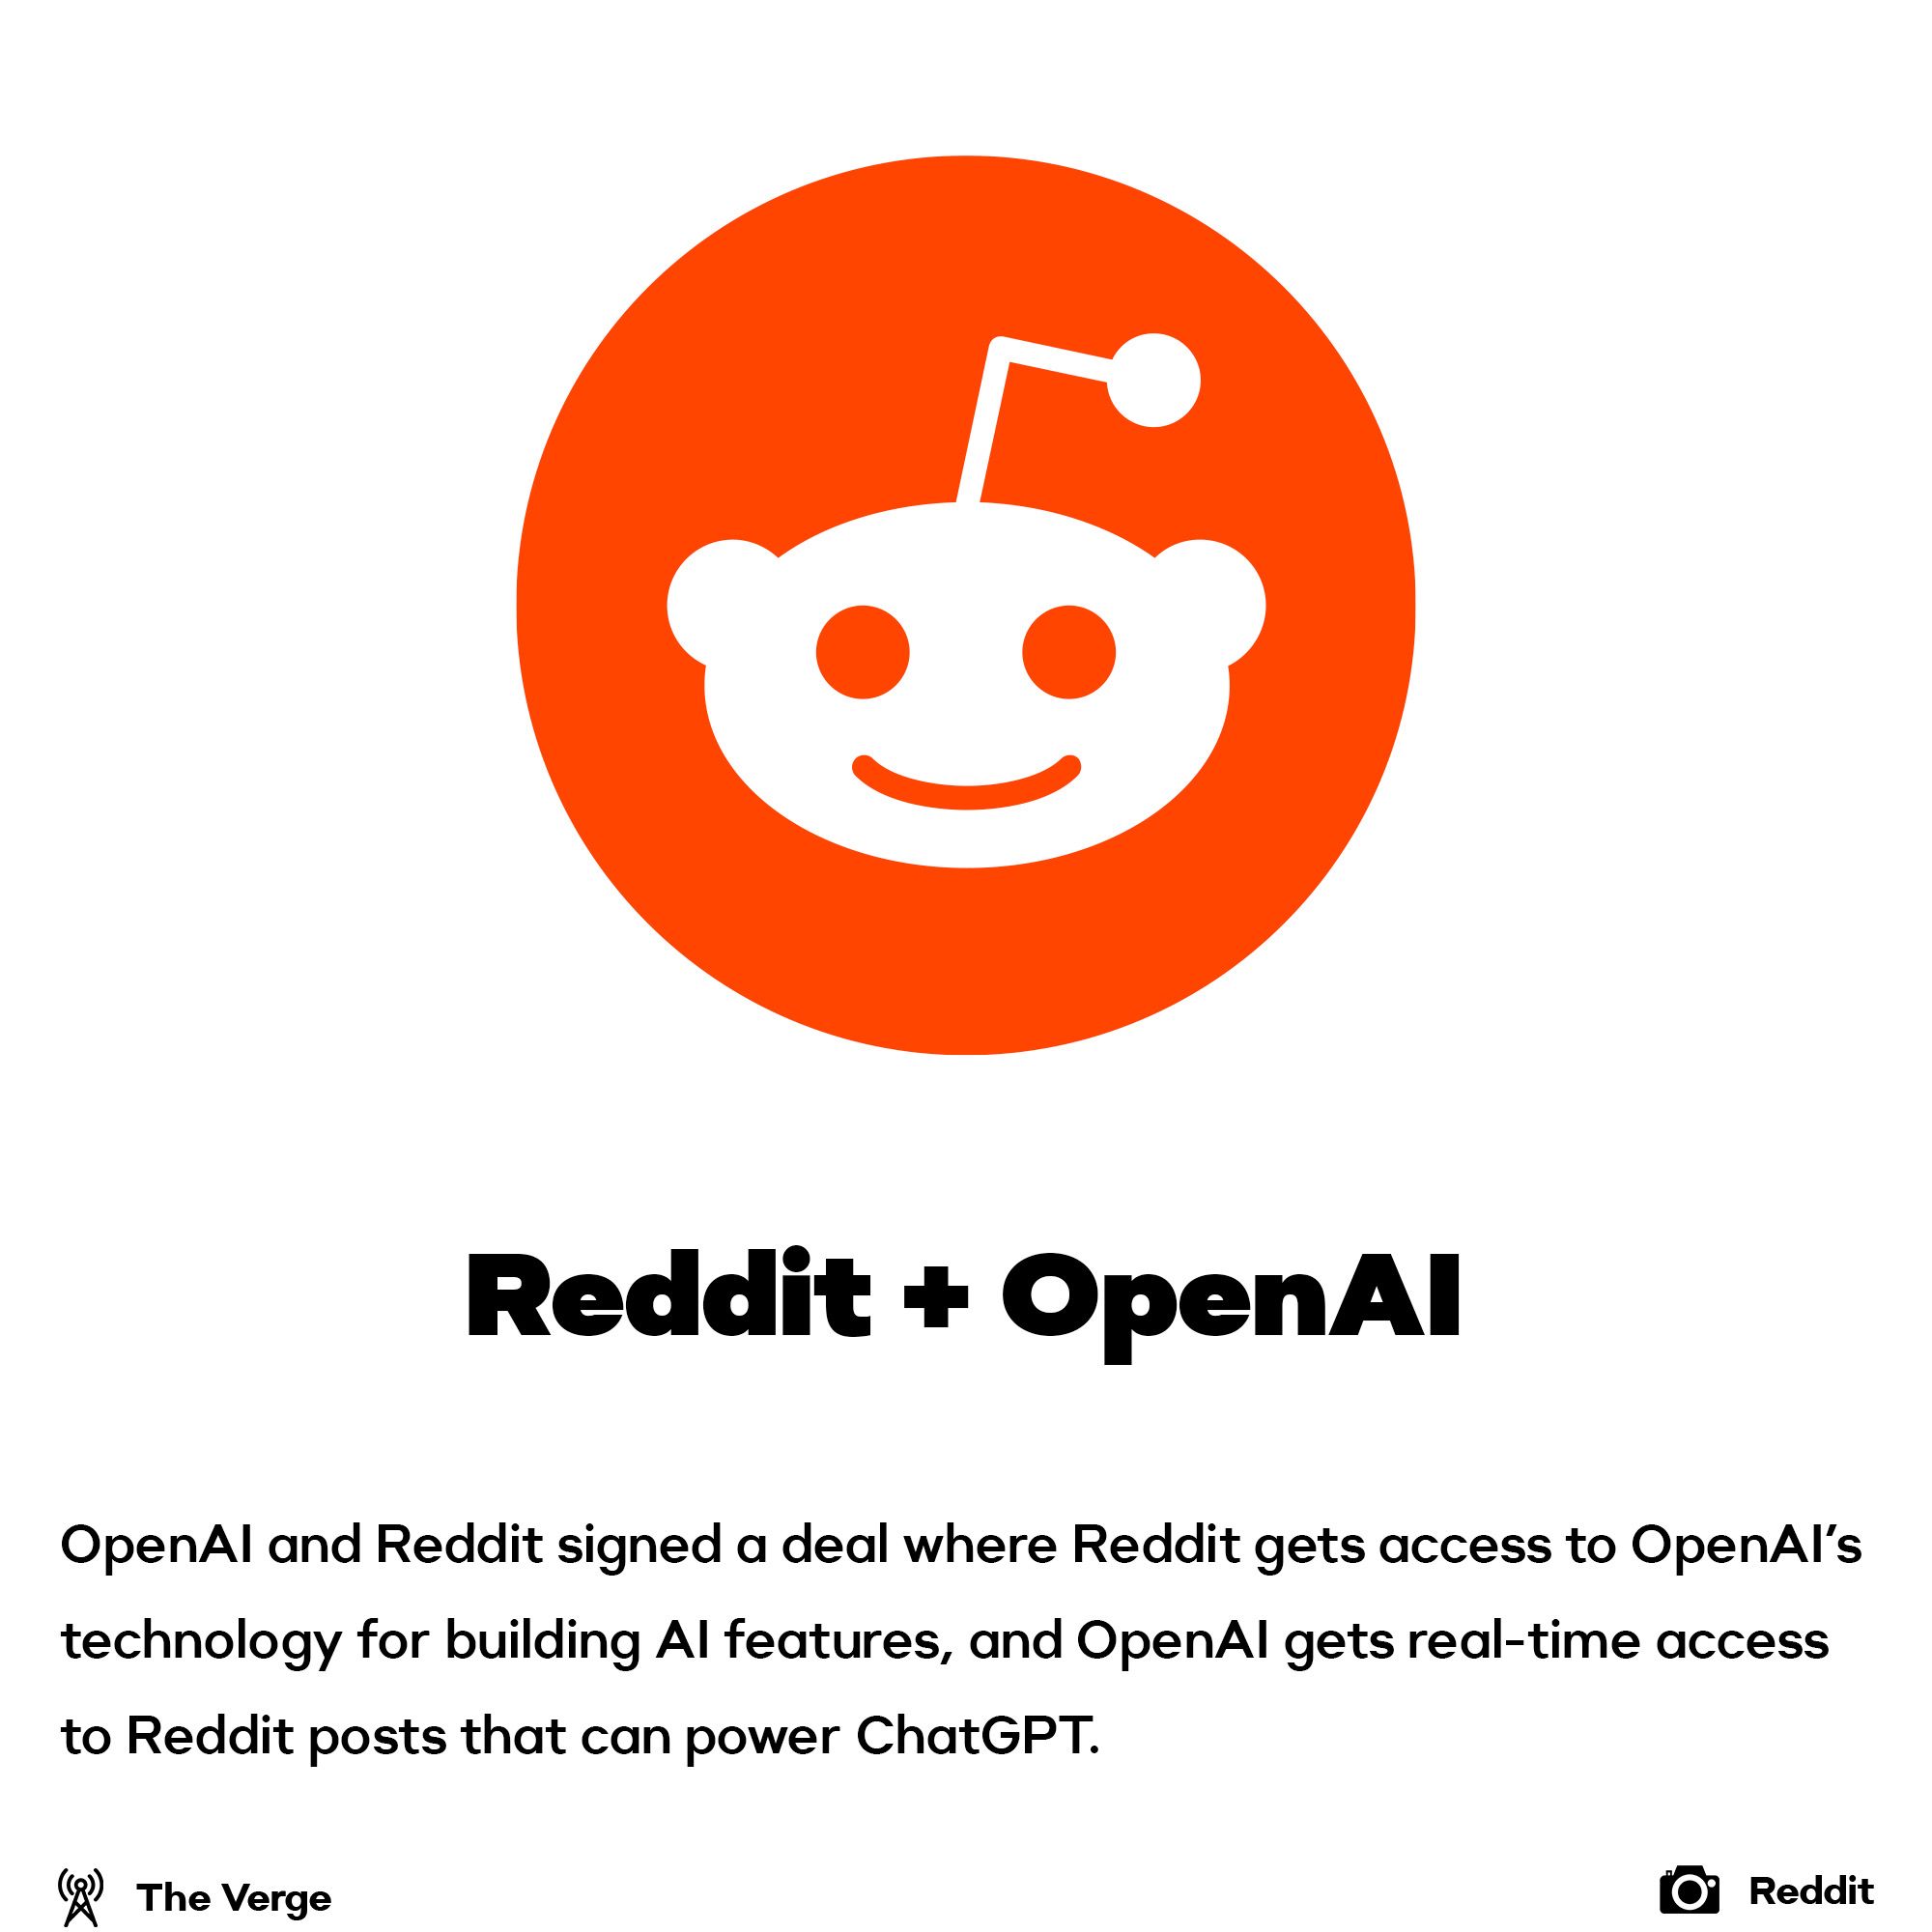 Reddit works with OpenAI